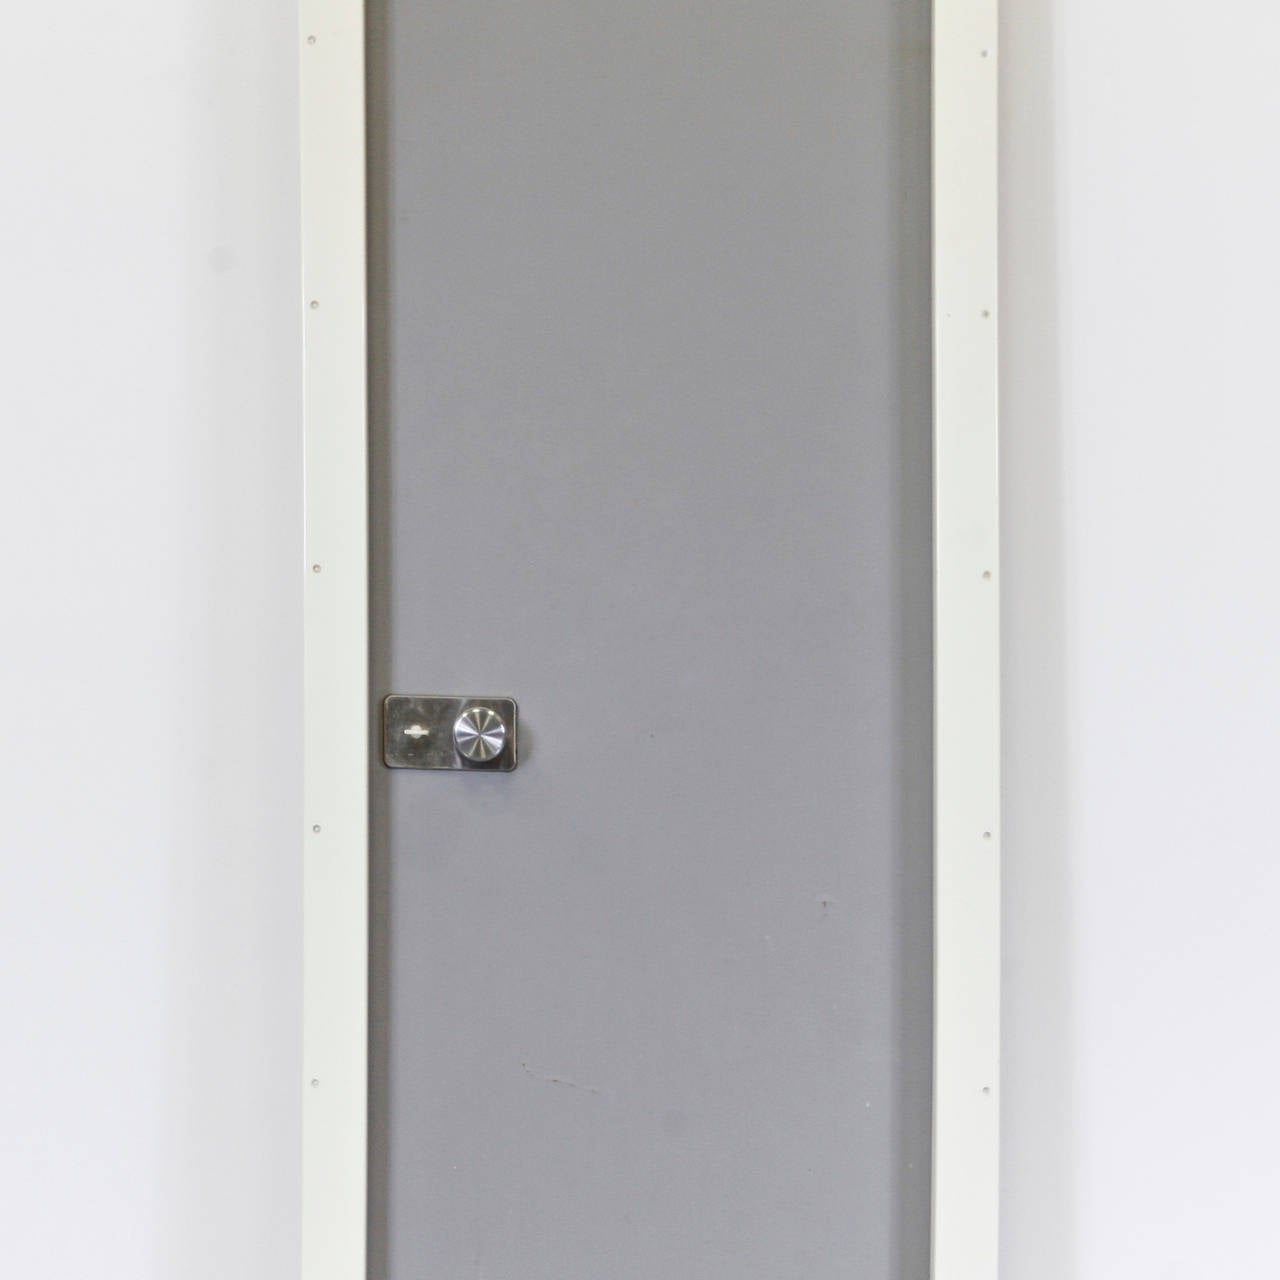 Door designed by Charlotte Perriand for Les Arcs ski Resort around 1960, manufactured in France.
Fiber glass structure, lacquered wood.

In good original condition, with minor wear consistent with age and use, preserving a beautiful patina.

We